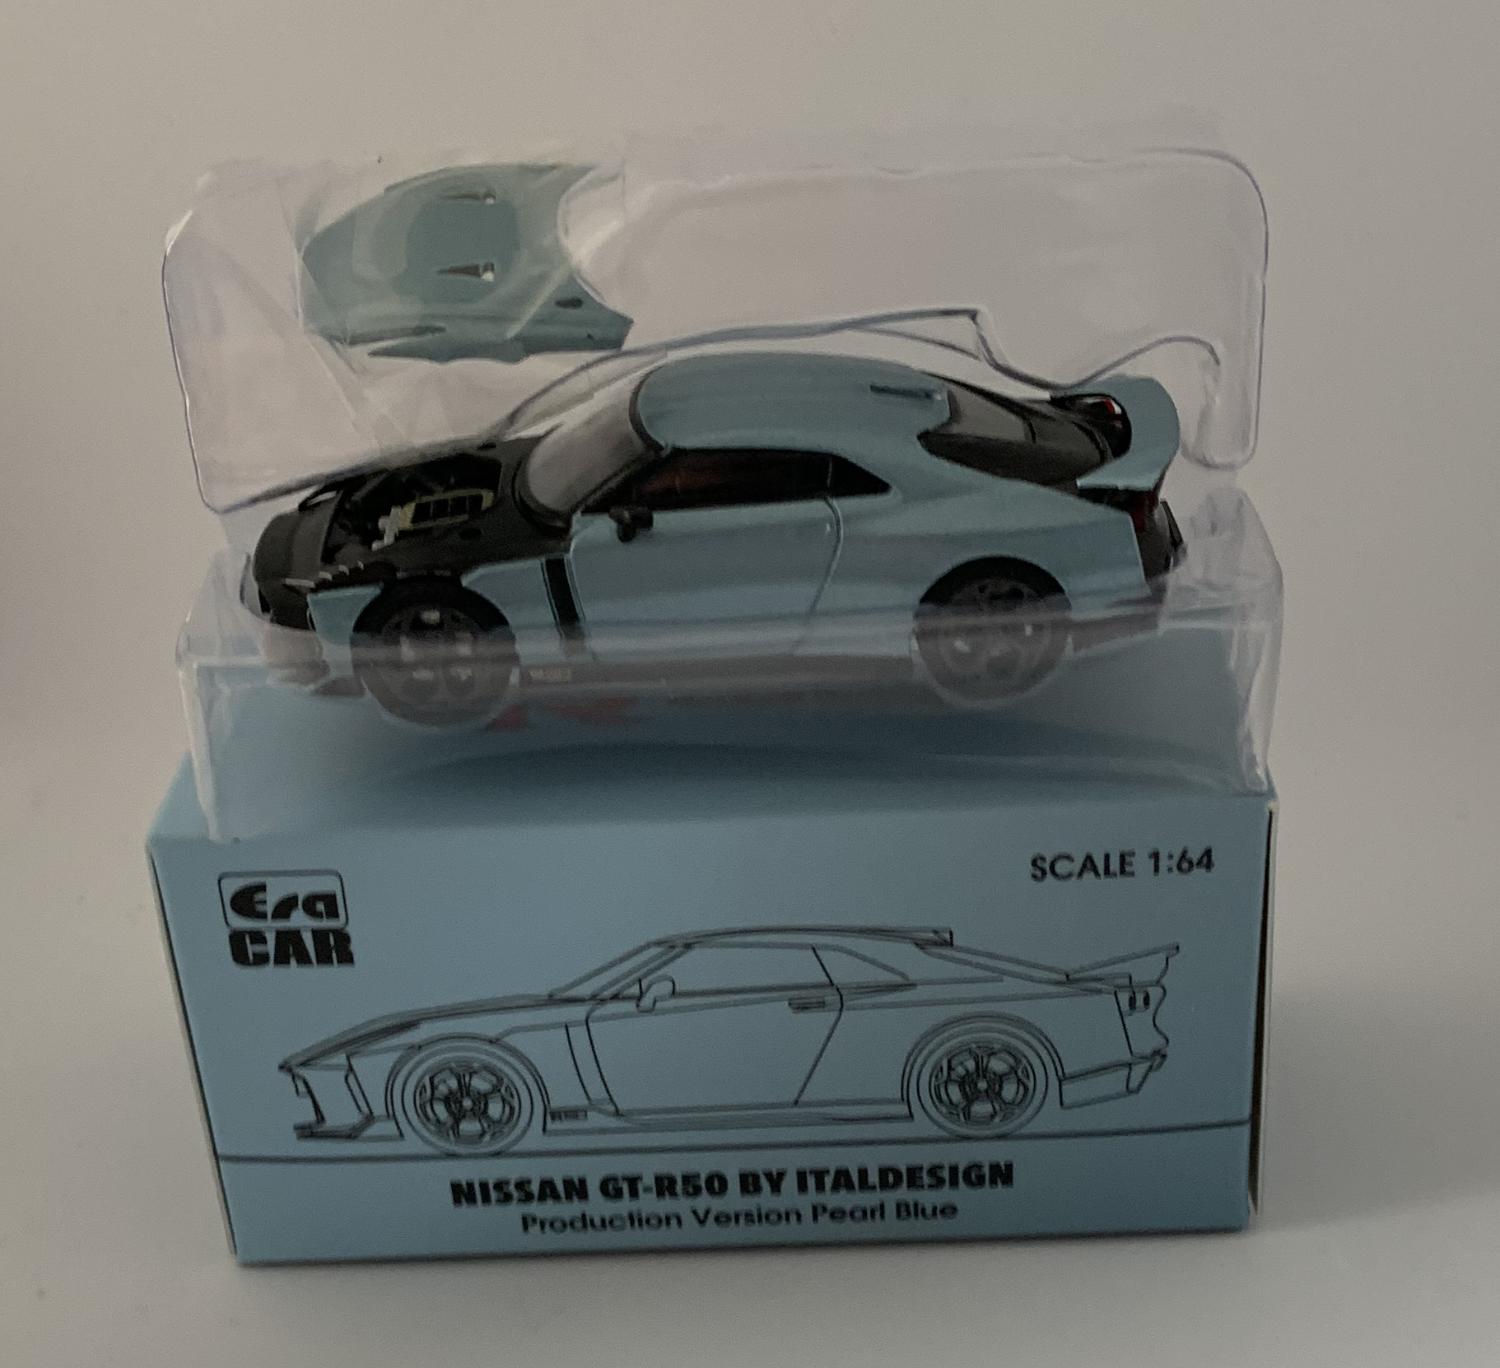 Nissan GT-R50 by Italdesign 2021 in pearl blue 1:64 scale model from ERA Car